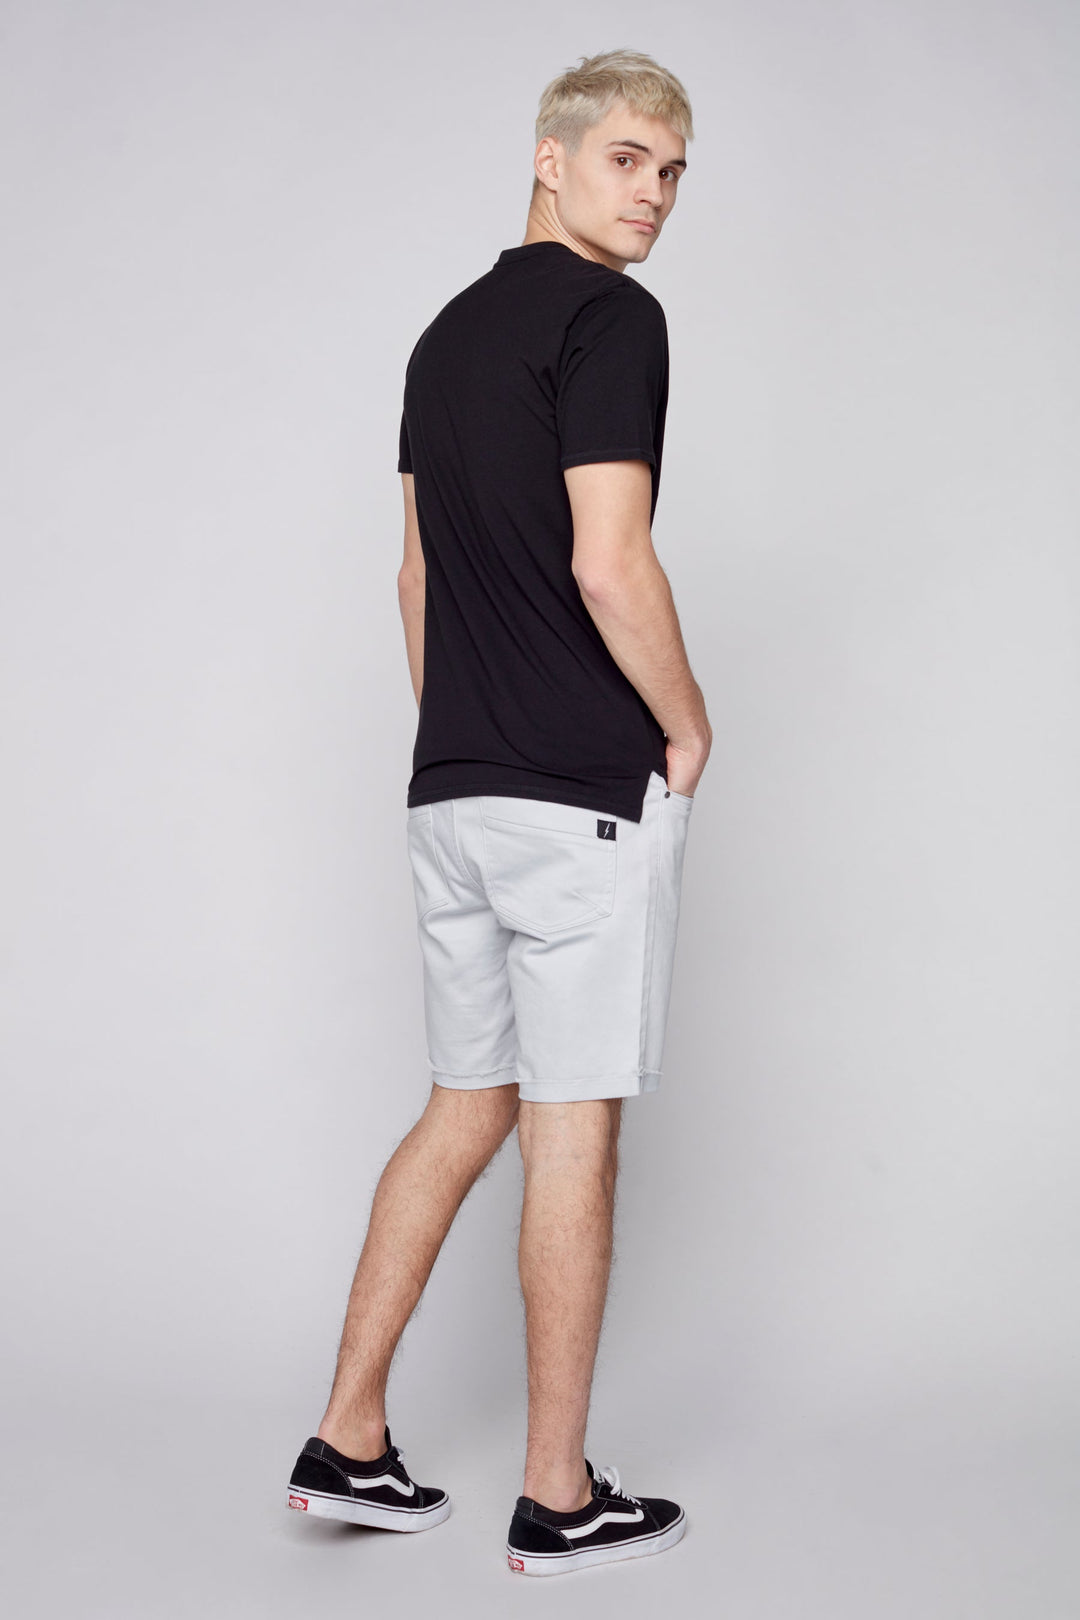 LENNON - Mens Rolled Up Shorts - Frost Blue